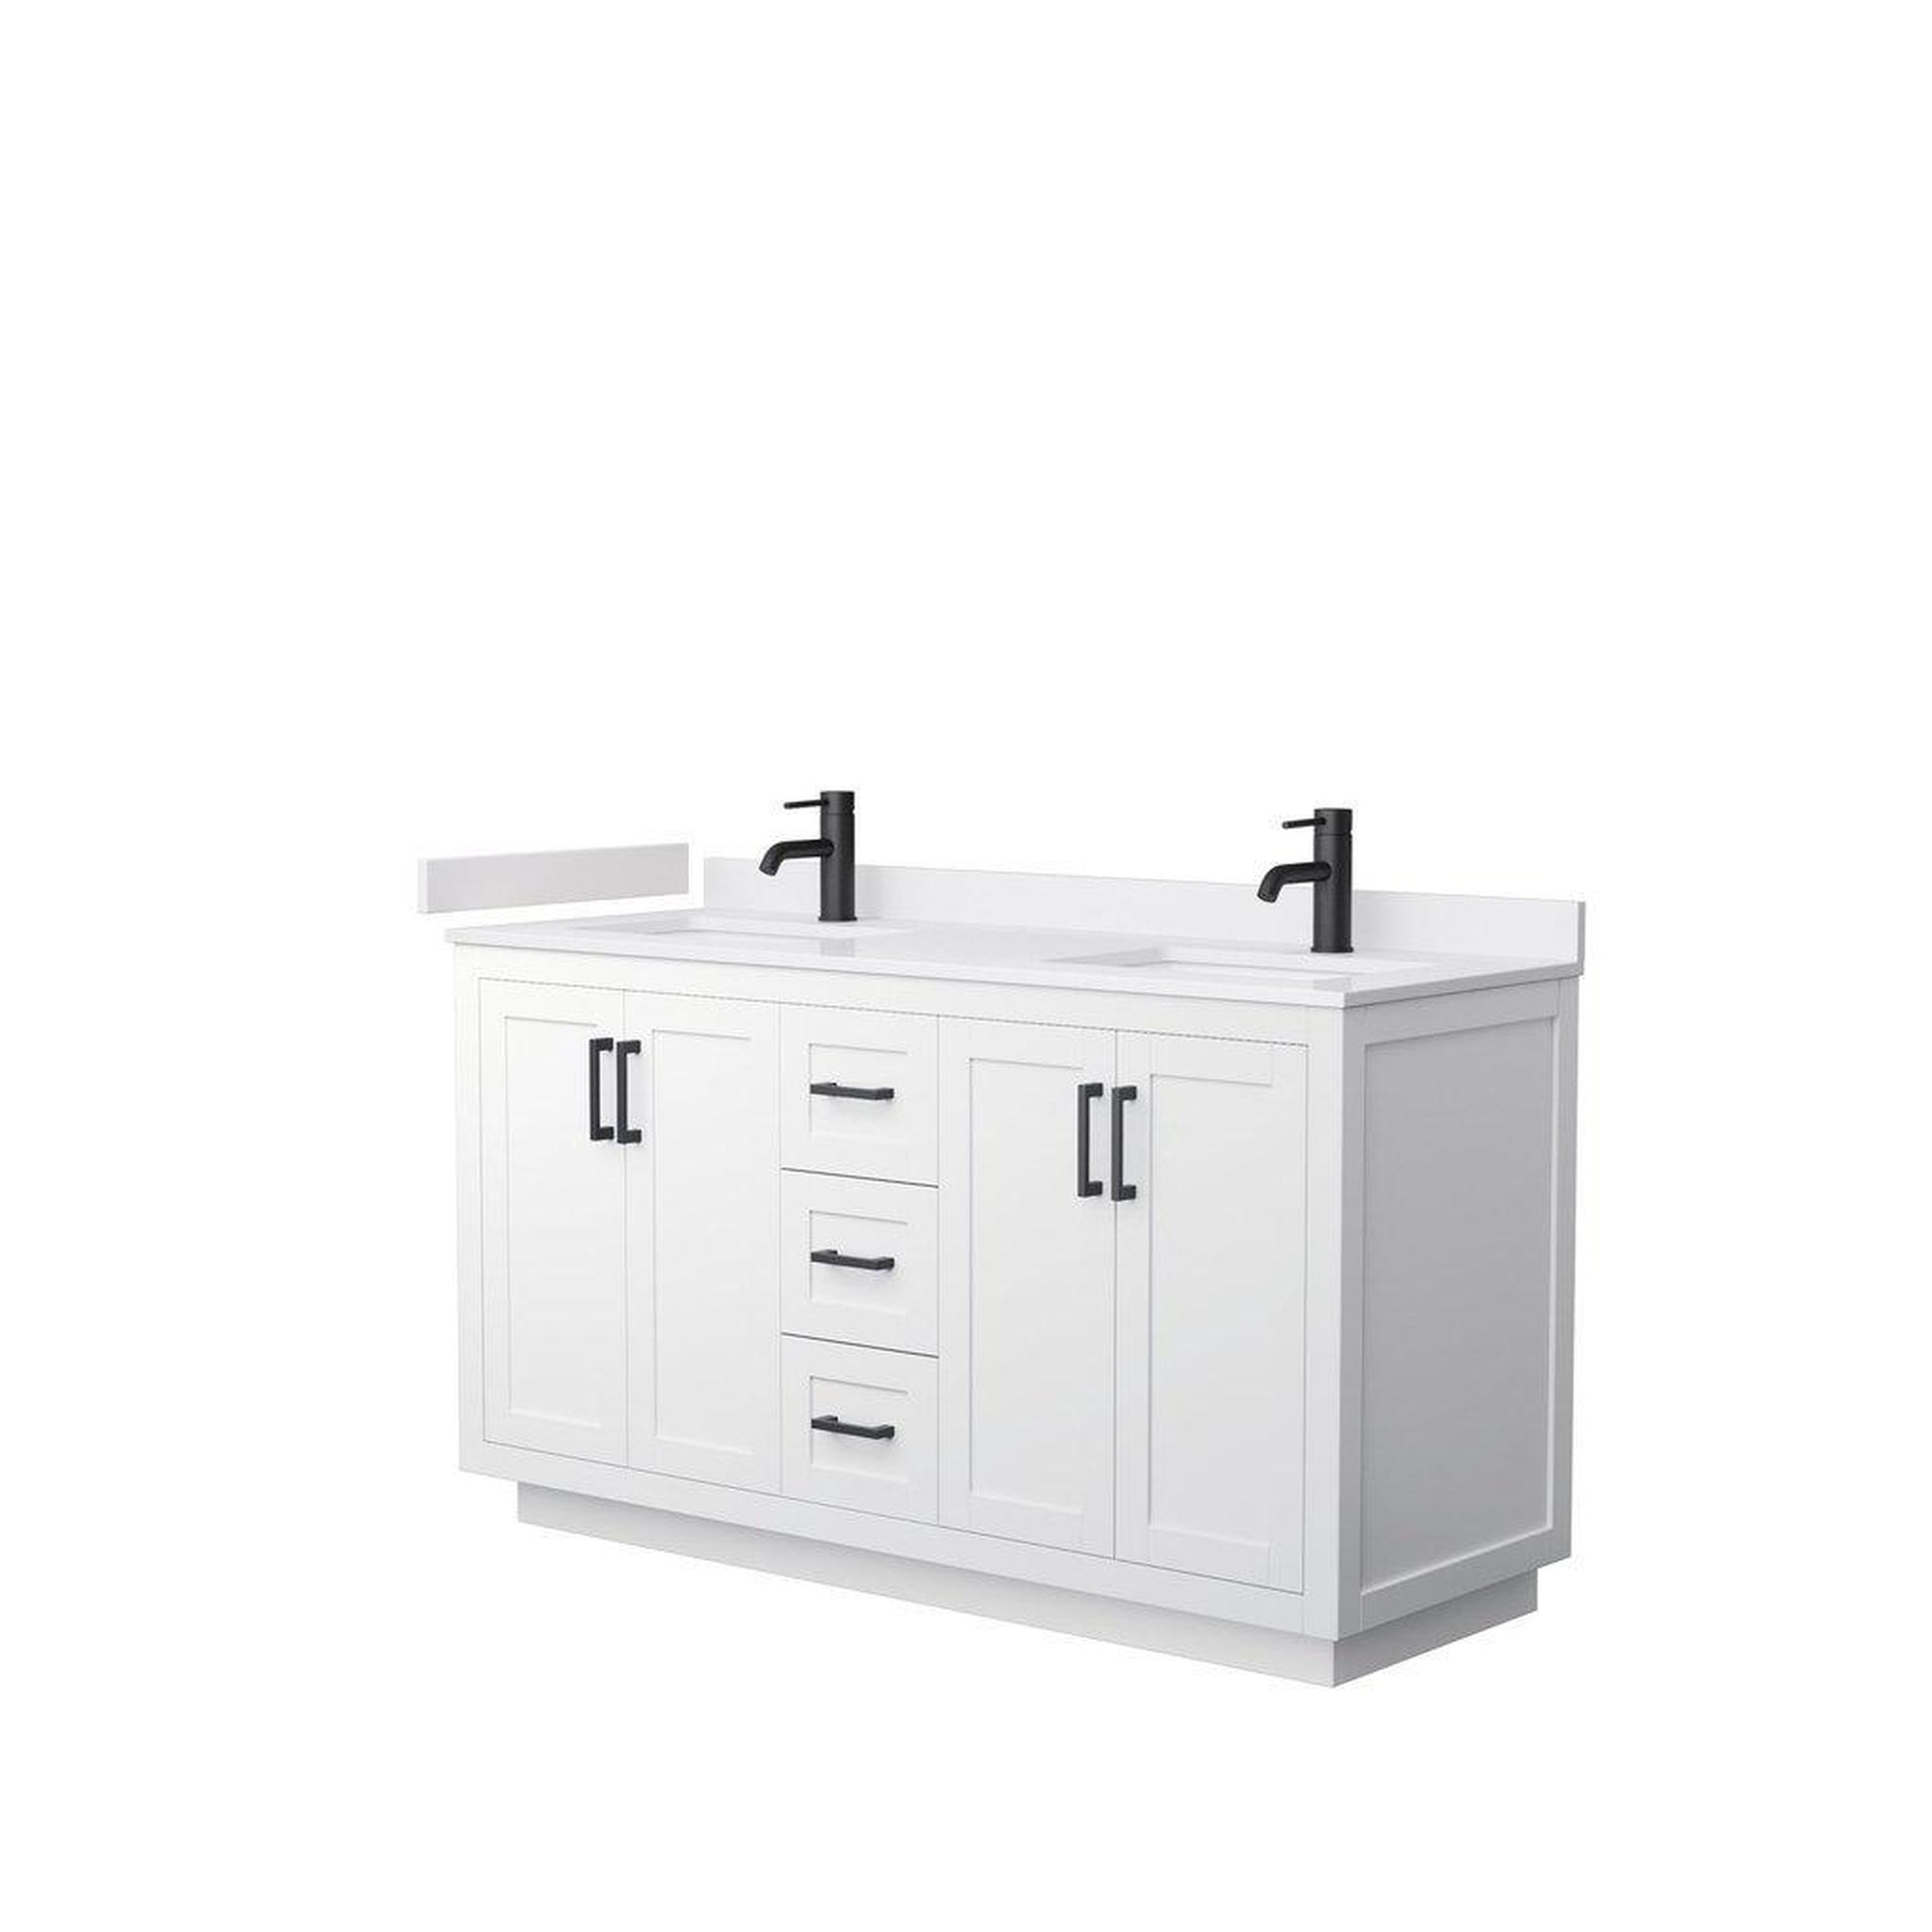 Wyndham Collection Miranda 60" Double Bathroom White Vanity Set With White Cultured Marble Countertop, Undermount Square Sink, And Matte Black Trim